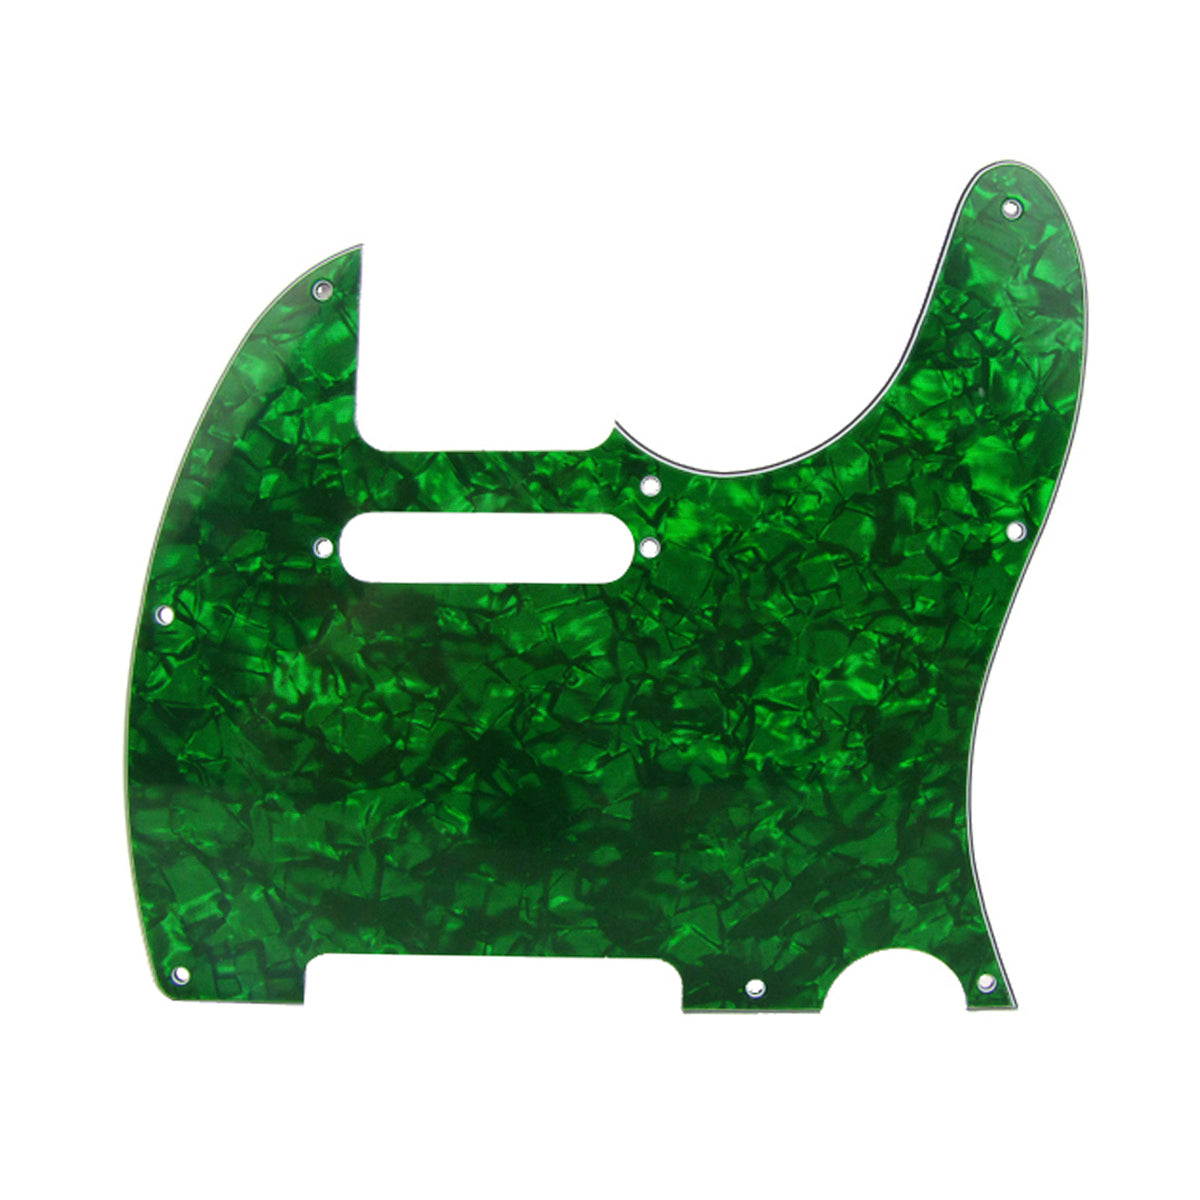 Musiclily 8 Hole Tele Guitar Pickguard for USA/Mexican Made Fender Standard Telecaster Modern Style, 4Ply Green Pearl